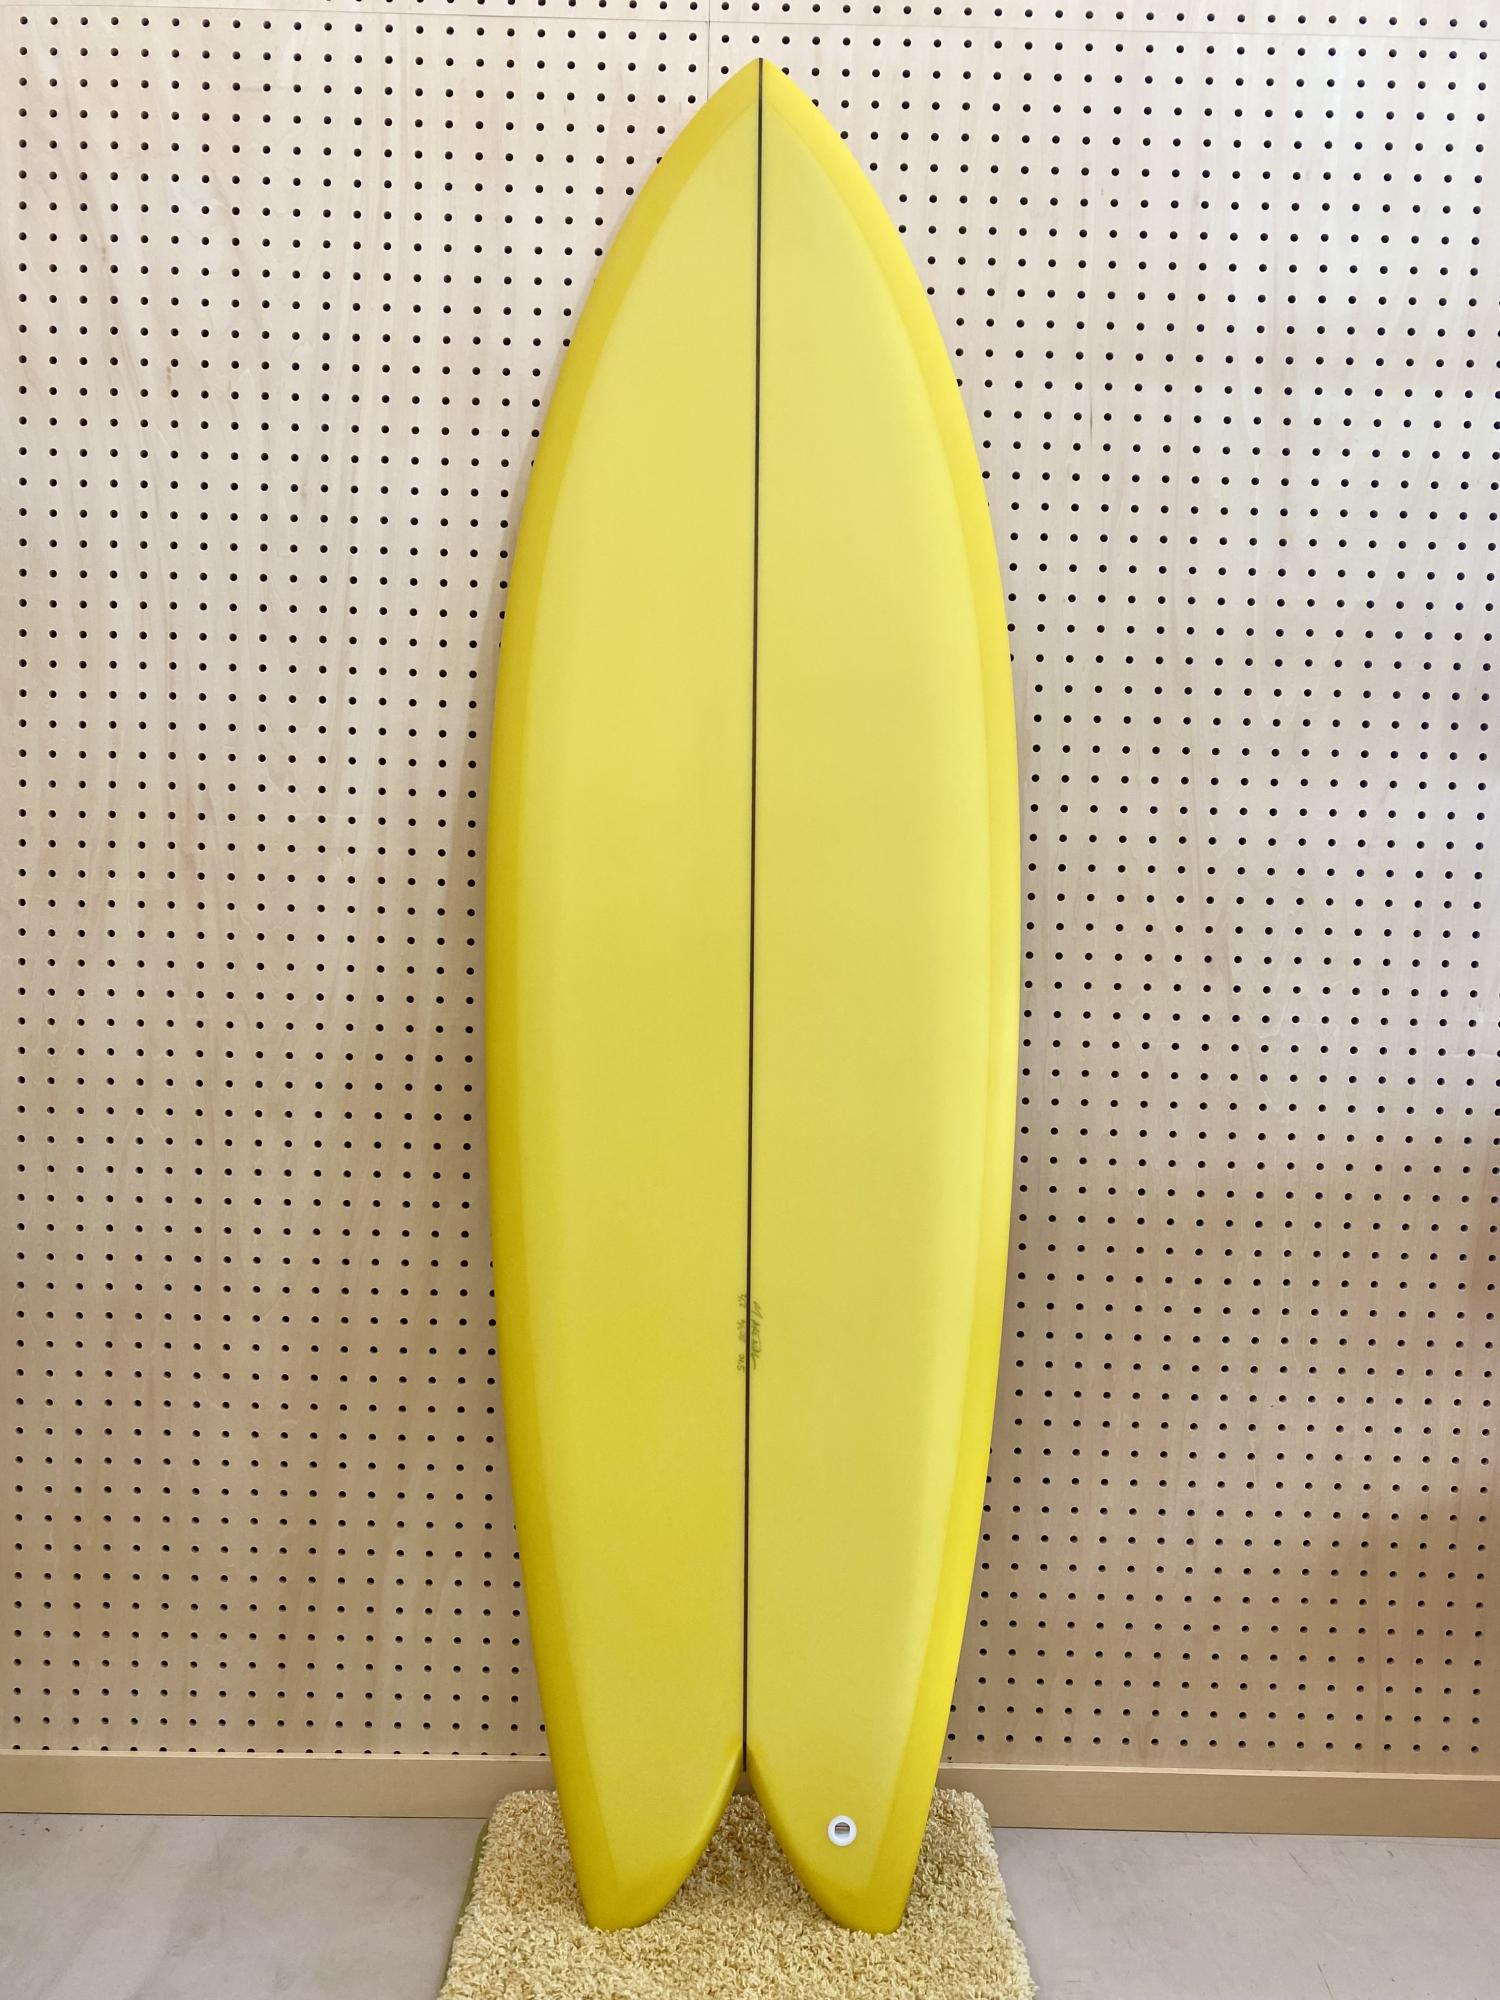 5.10 Fish Arenal Surfboards